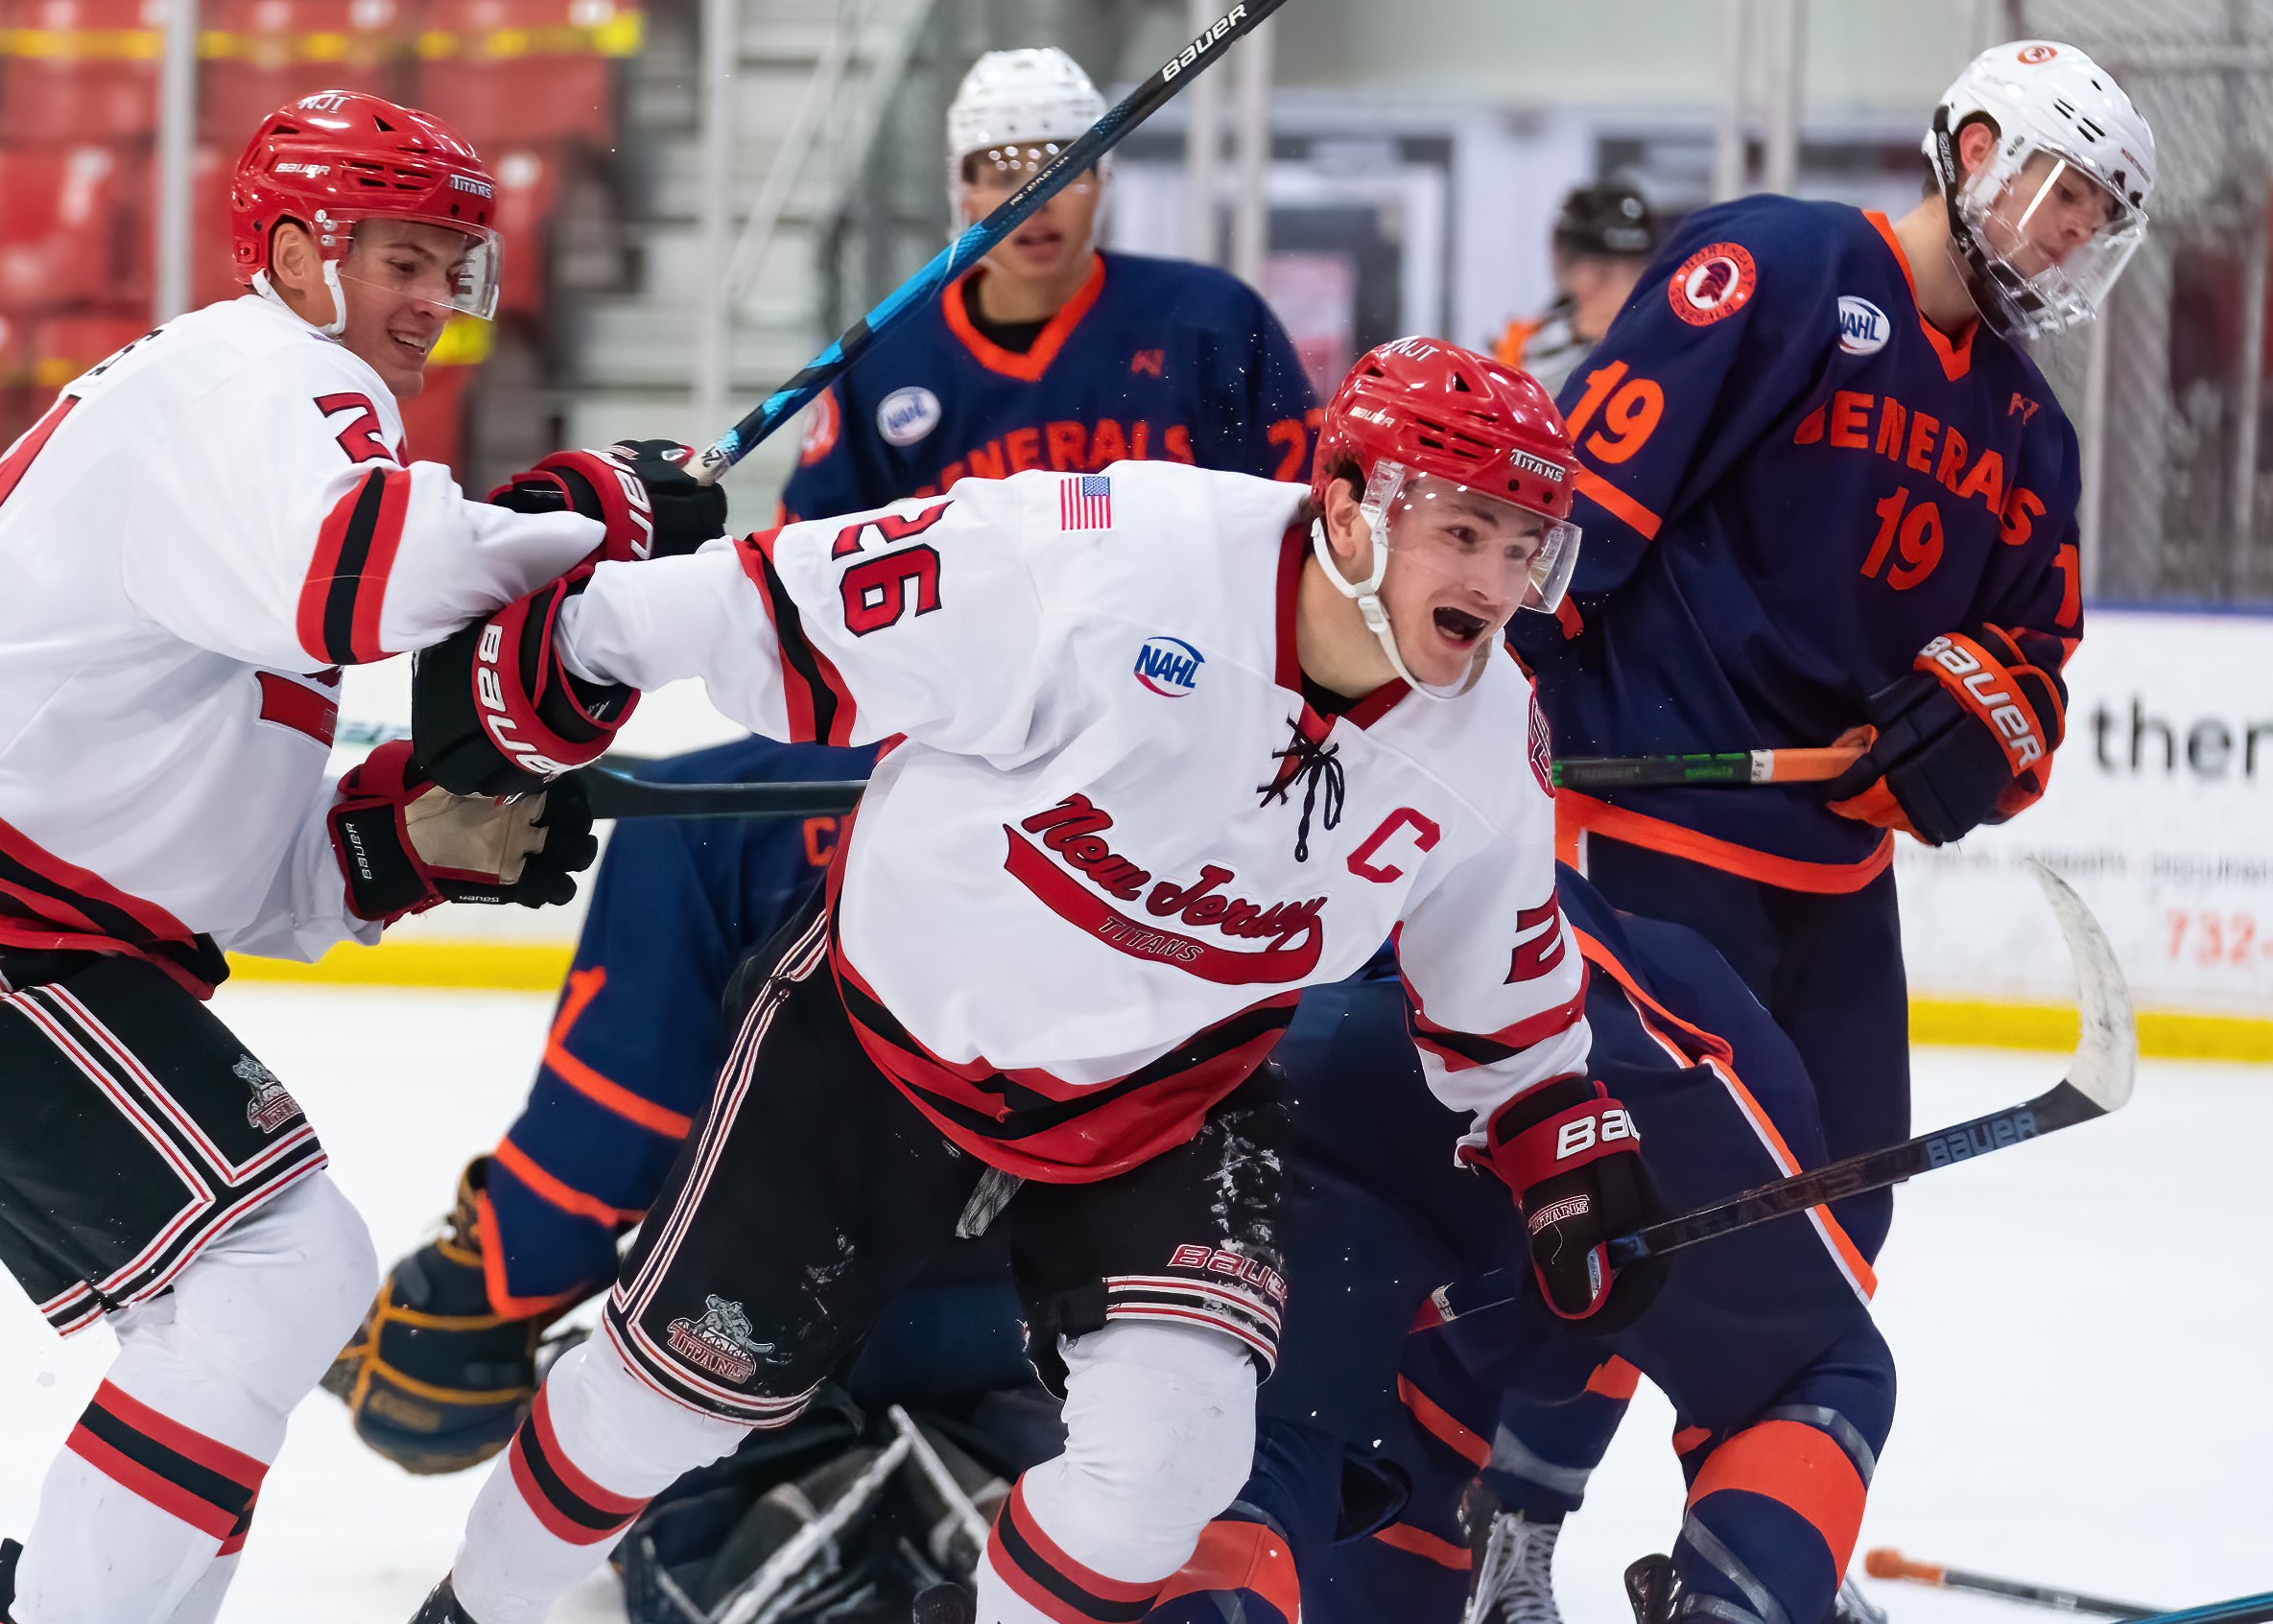 Suede and Pelc help lead Titans to 6 – 1 win over Generals